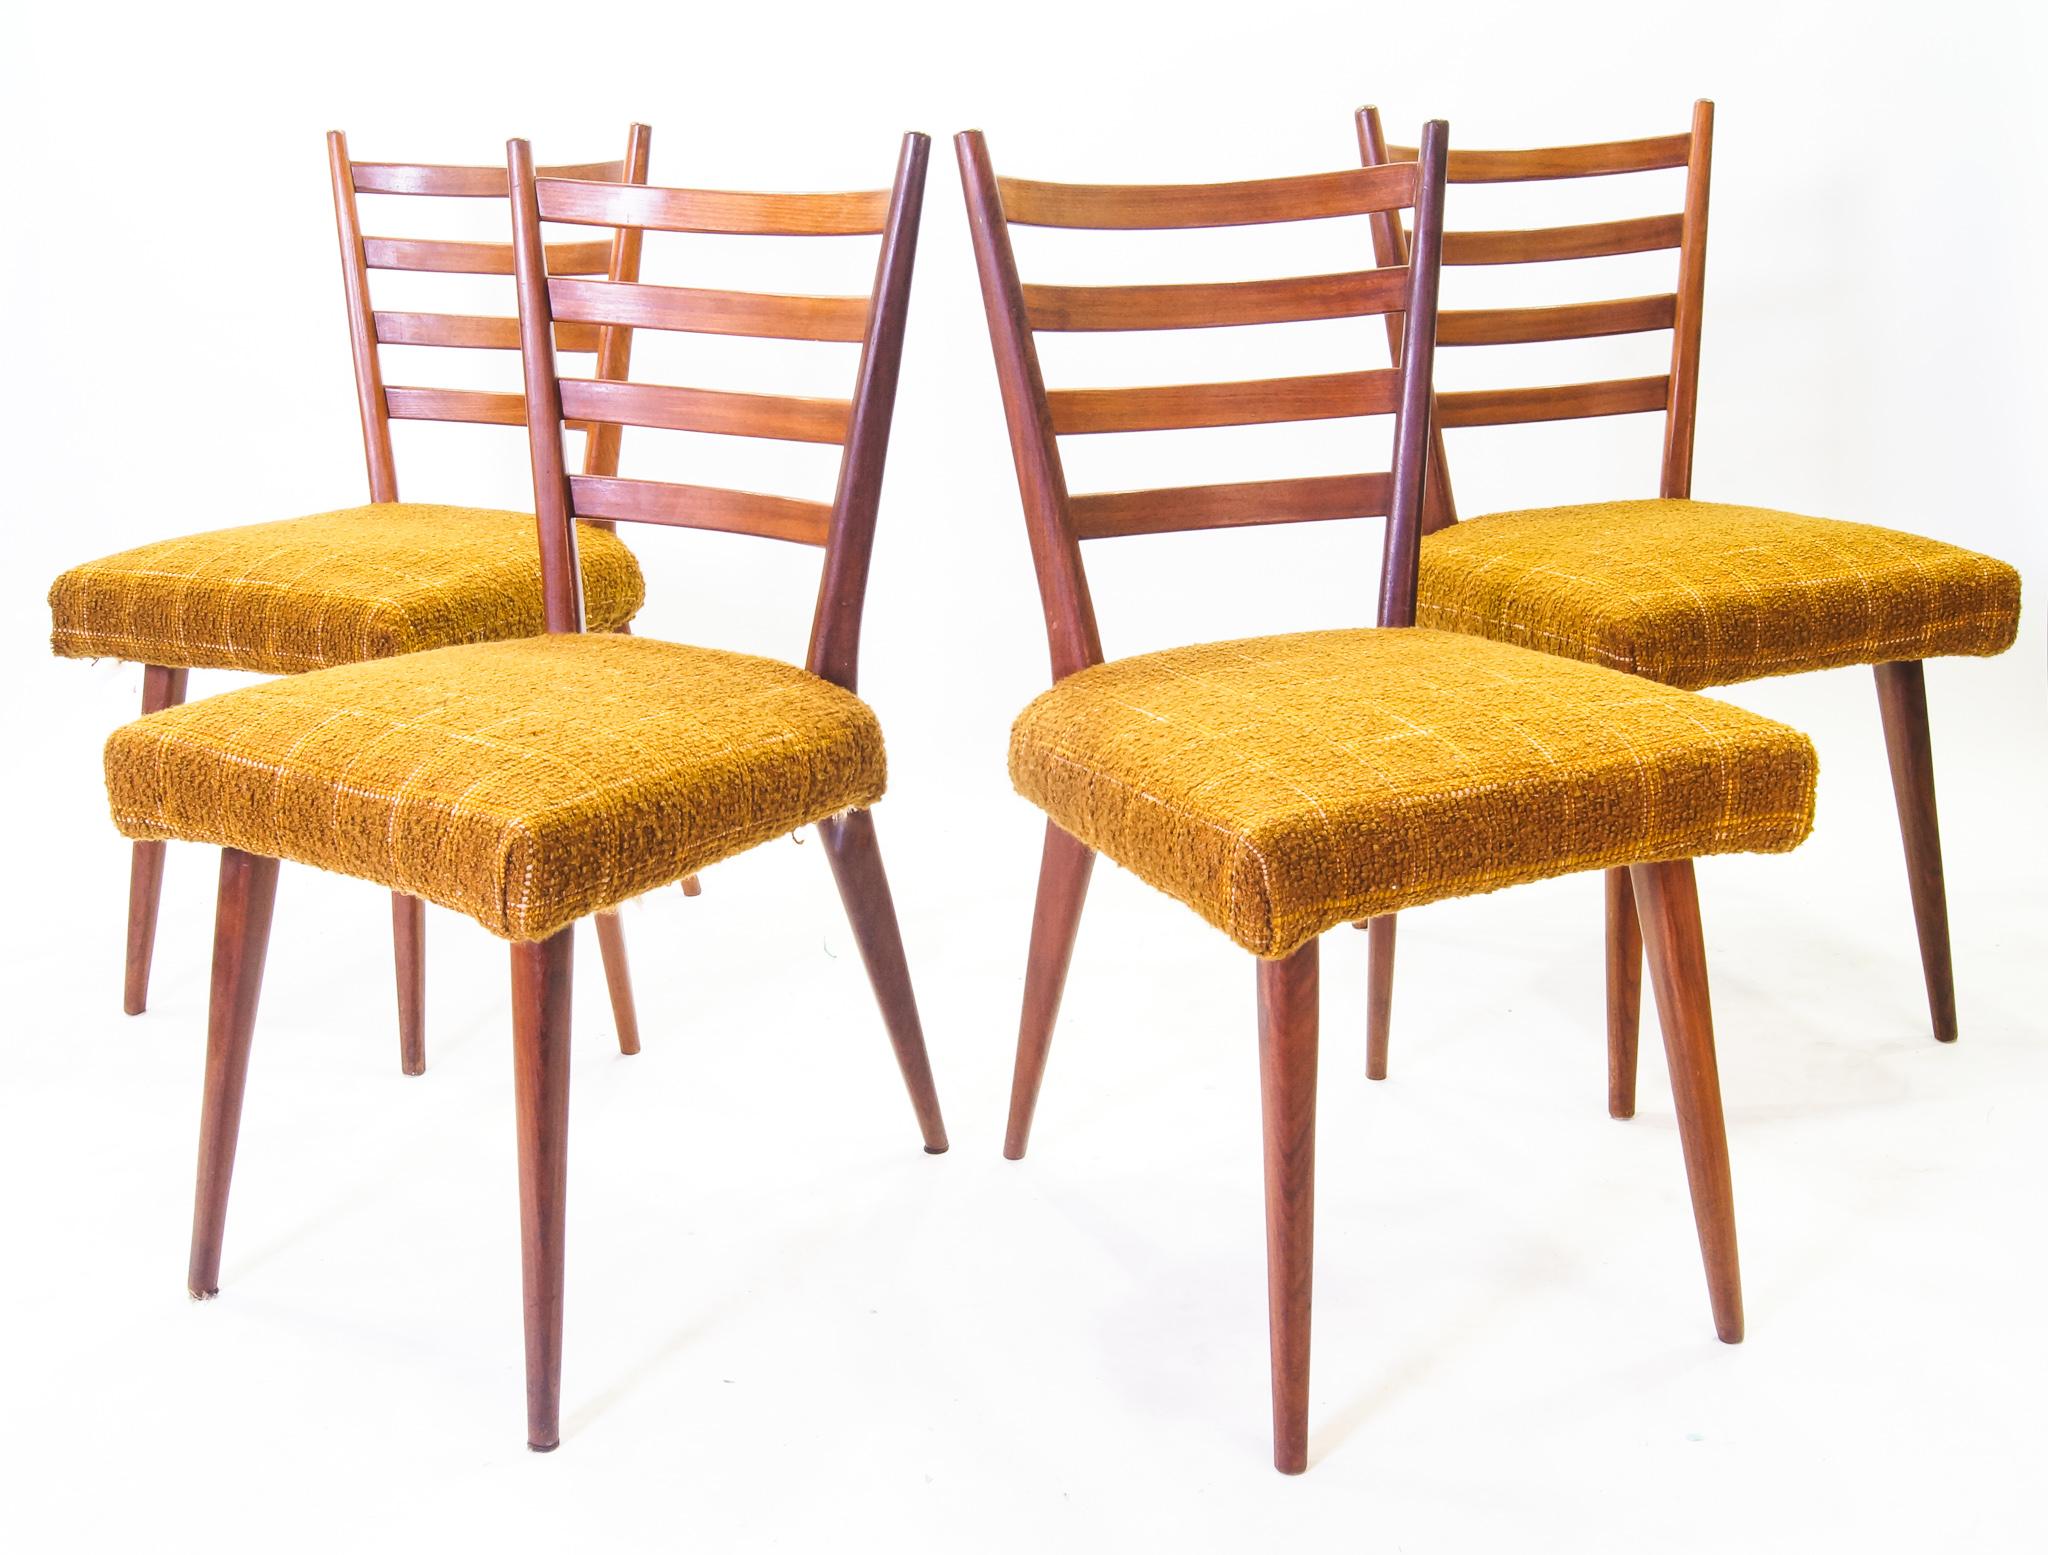 Cees Braakman for Pastoe - Ladder Chairs, 1950's - Dinerset of 6 3